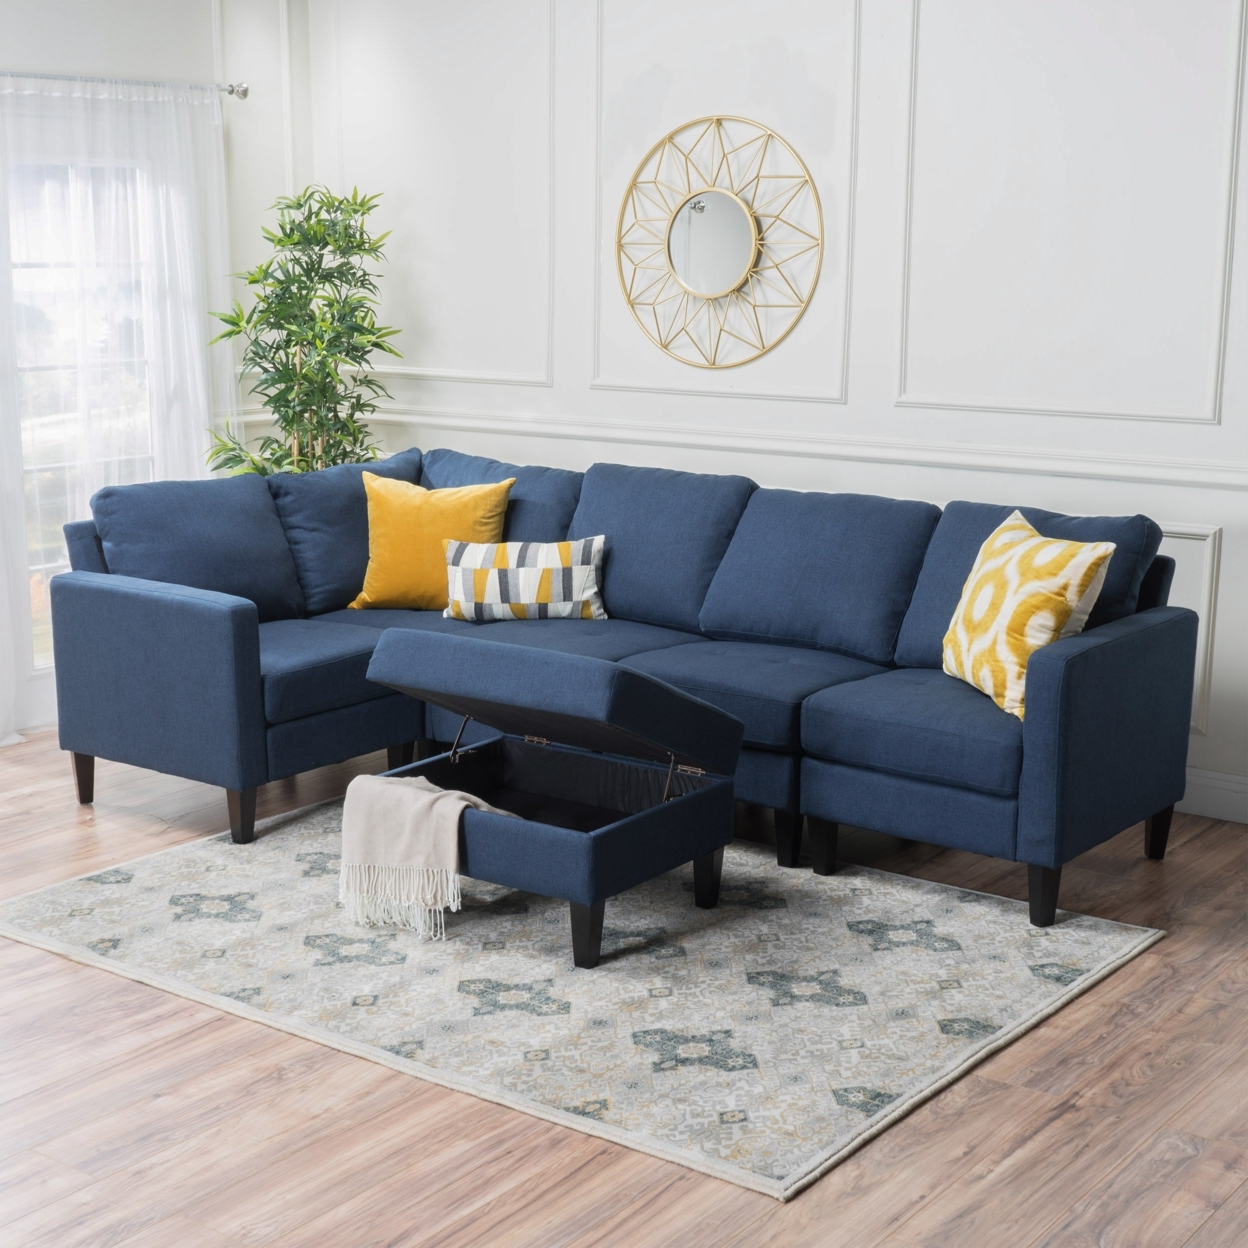 Carolina Fabric Sectional Couch With Storage Ottoman - Dark Gray